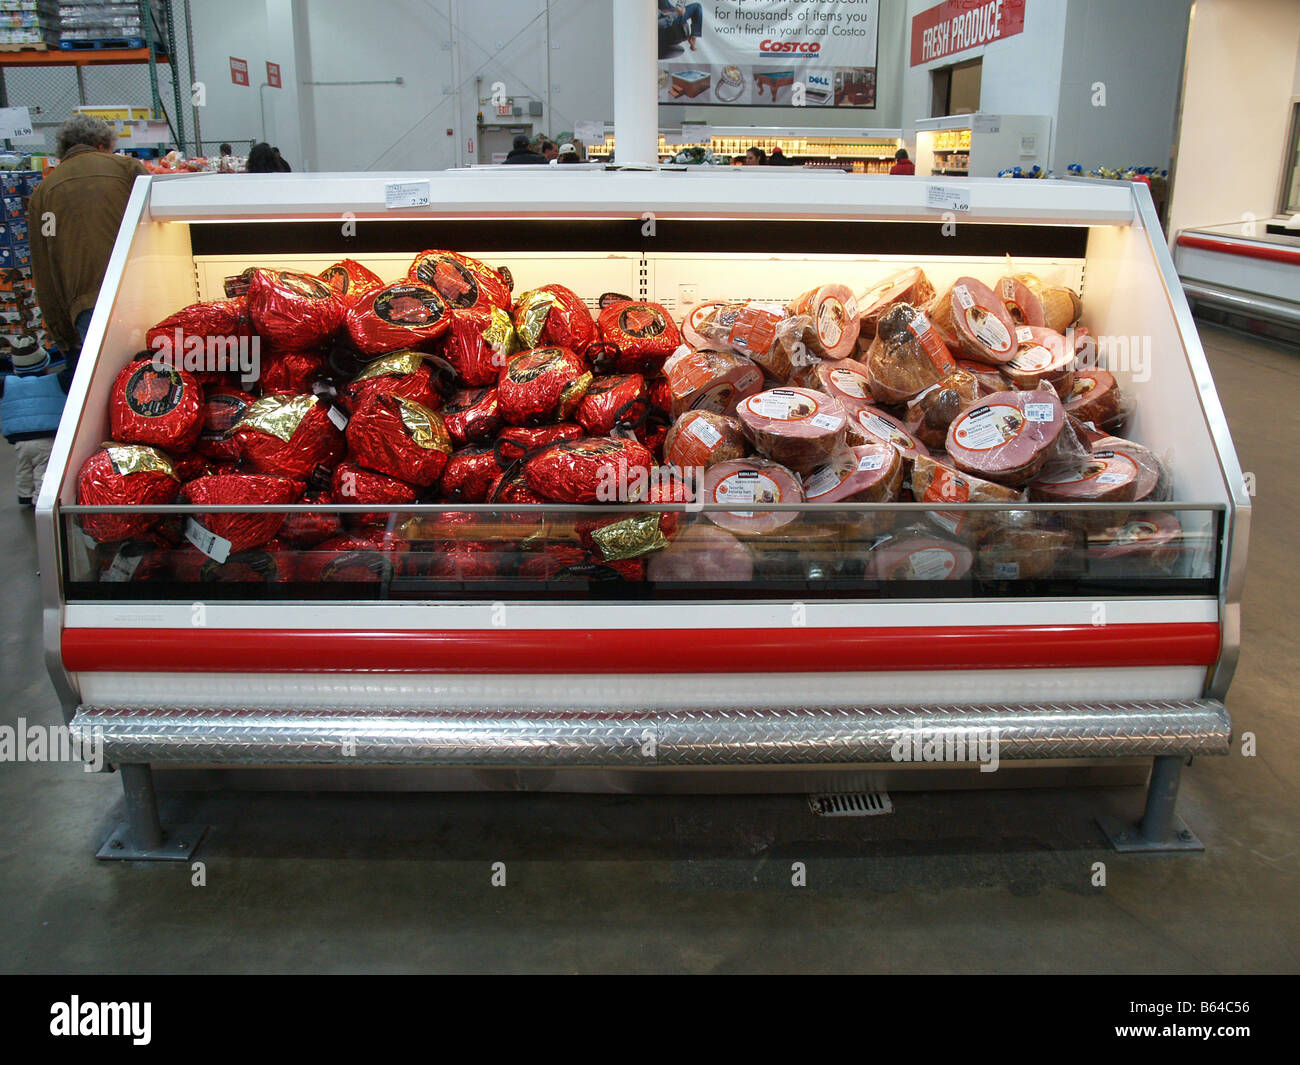 Hams for sale in a Costco Wholesale big box store in the United States Stock Photo